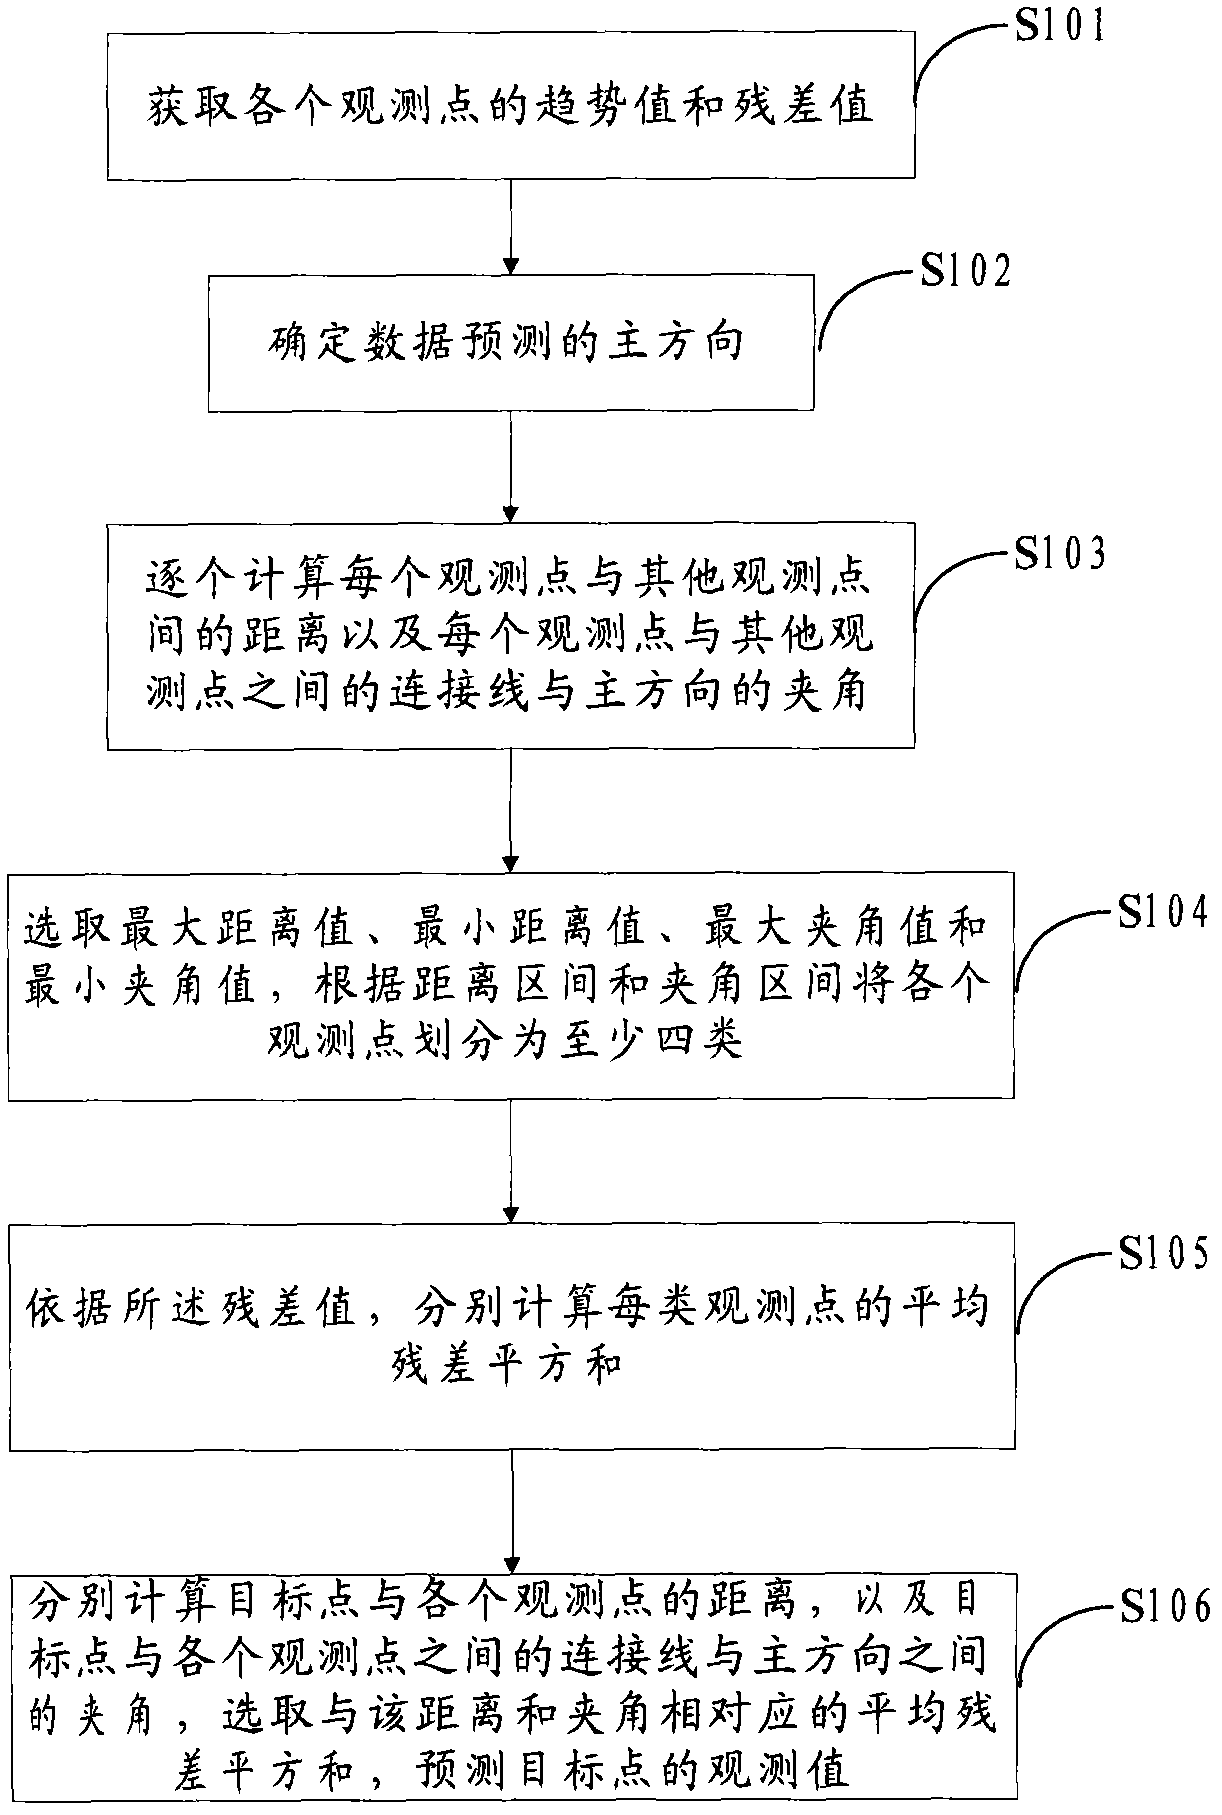 Method and system for forecasting data